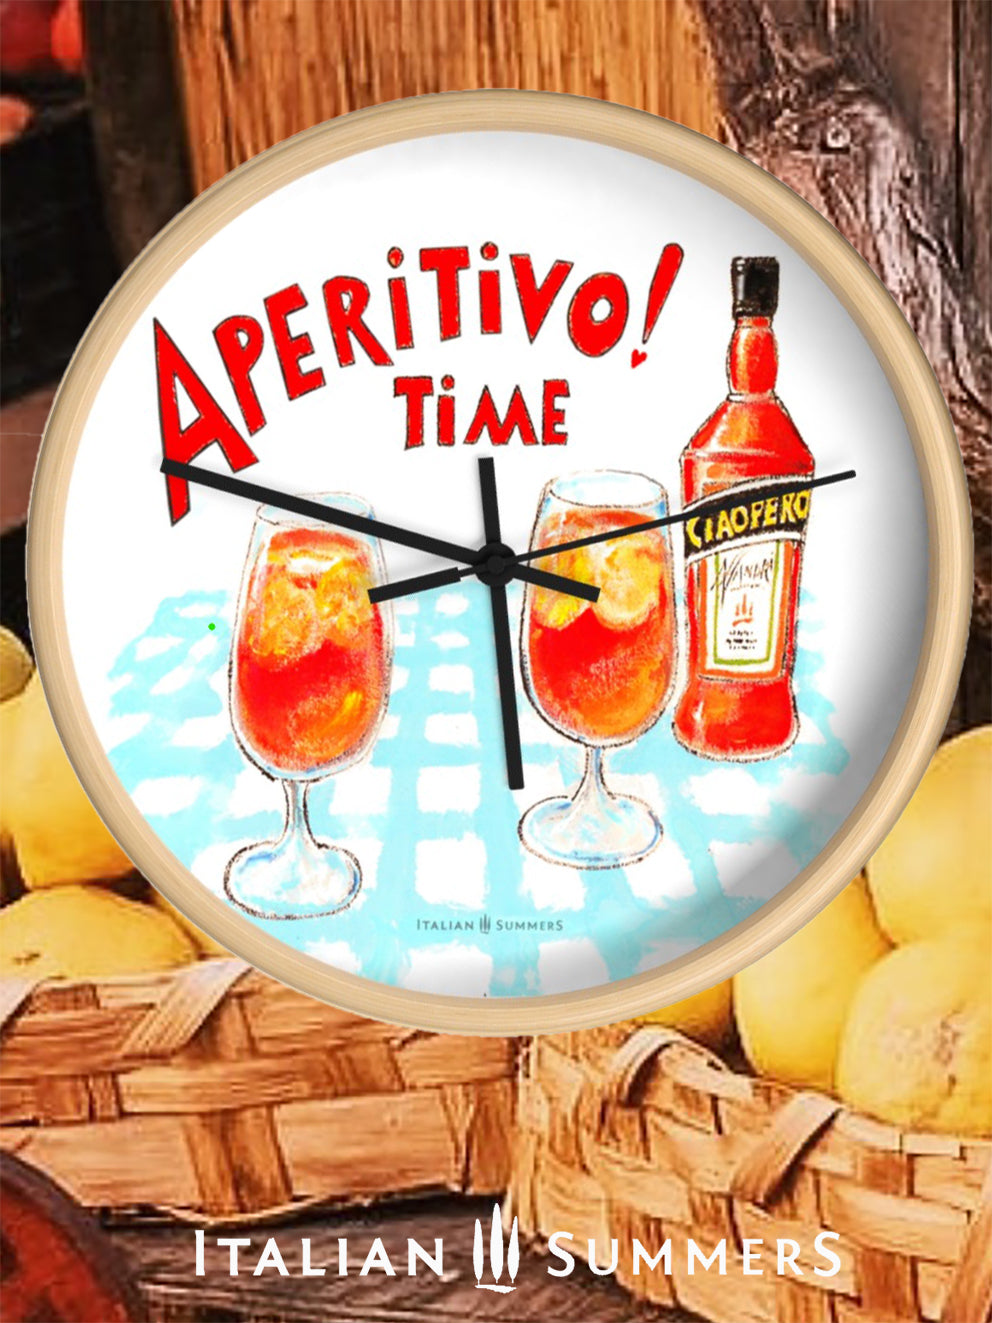 An Italy inspired rond clock with a print of Two glasses and a bottle of Aperol, whizh is called in the sketch Ciaoperol. The bottle and the foot glasses are standing on a light blue checkered table cloth. There is on top of the sketch the text 'Aperitivo time!' in a vintage red color, handwritten font. Made by Italian Summers